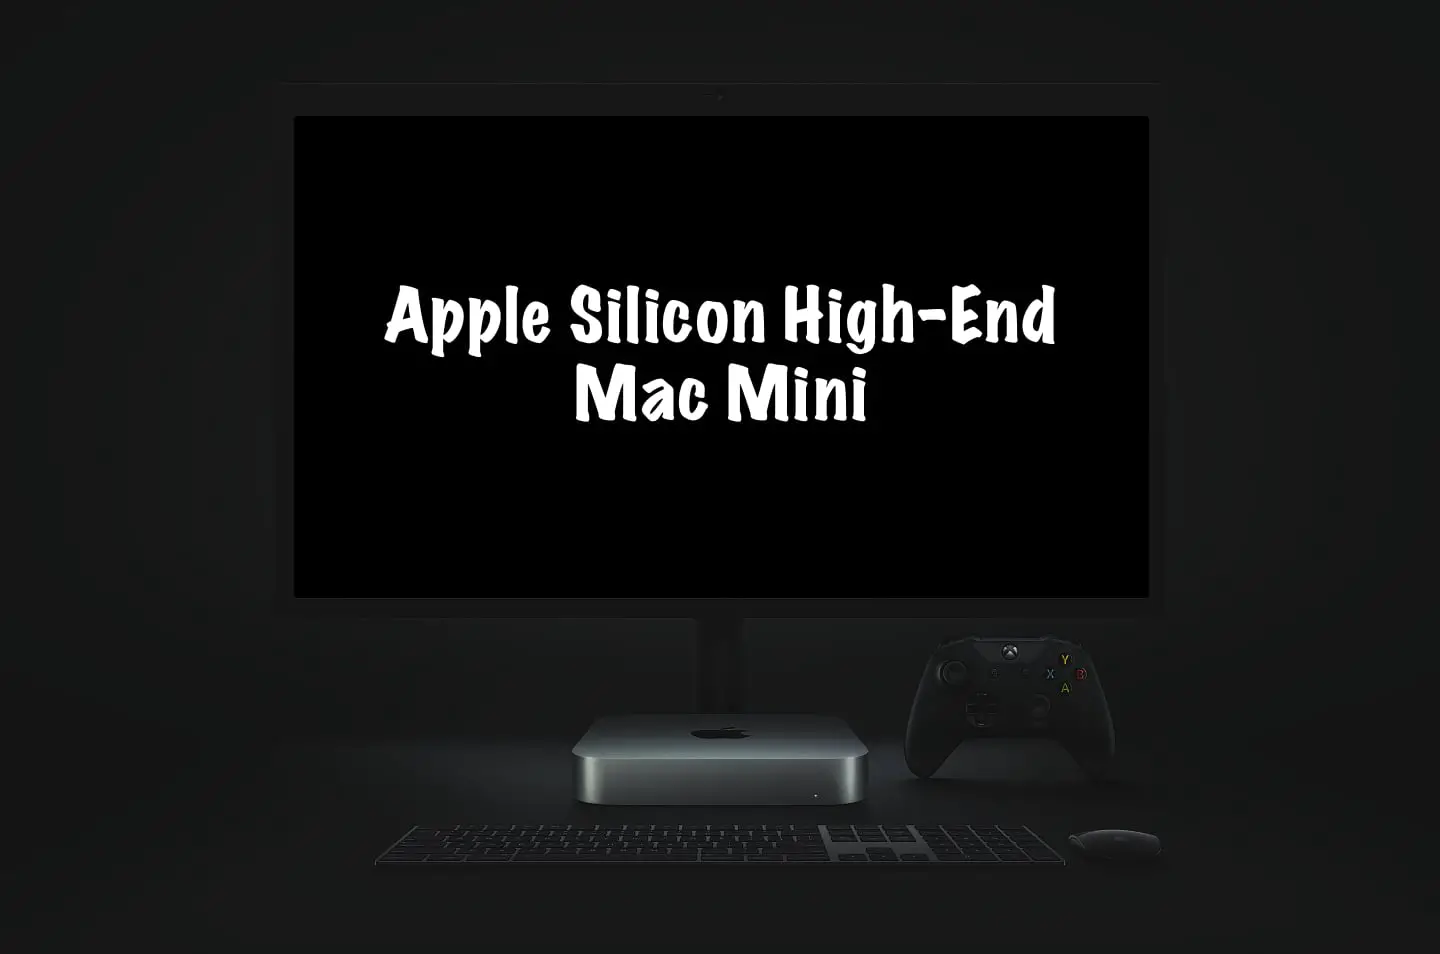 Apple Working on High-End Mac Mini with Apple Silicon